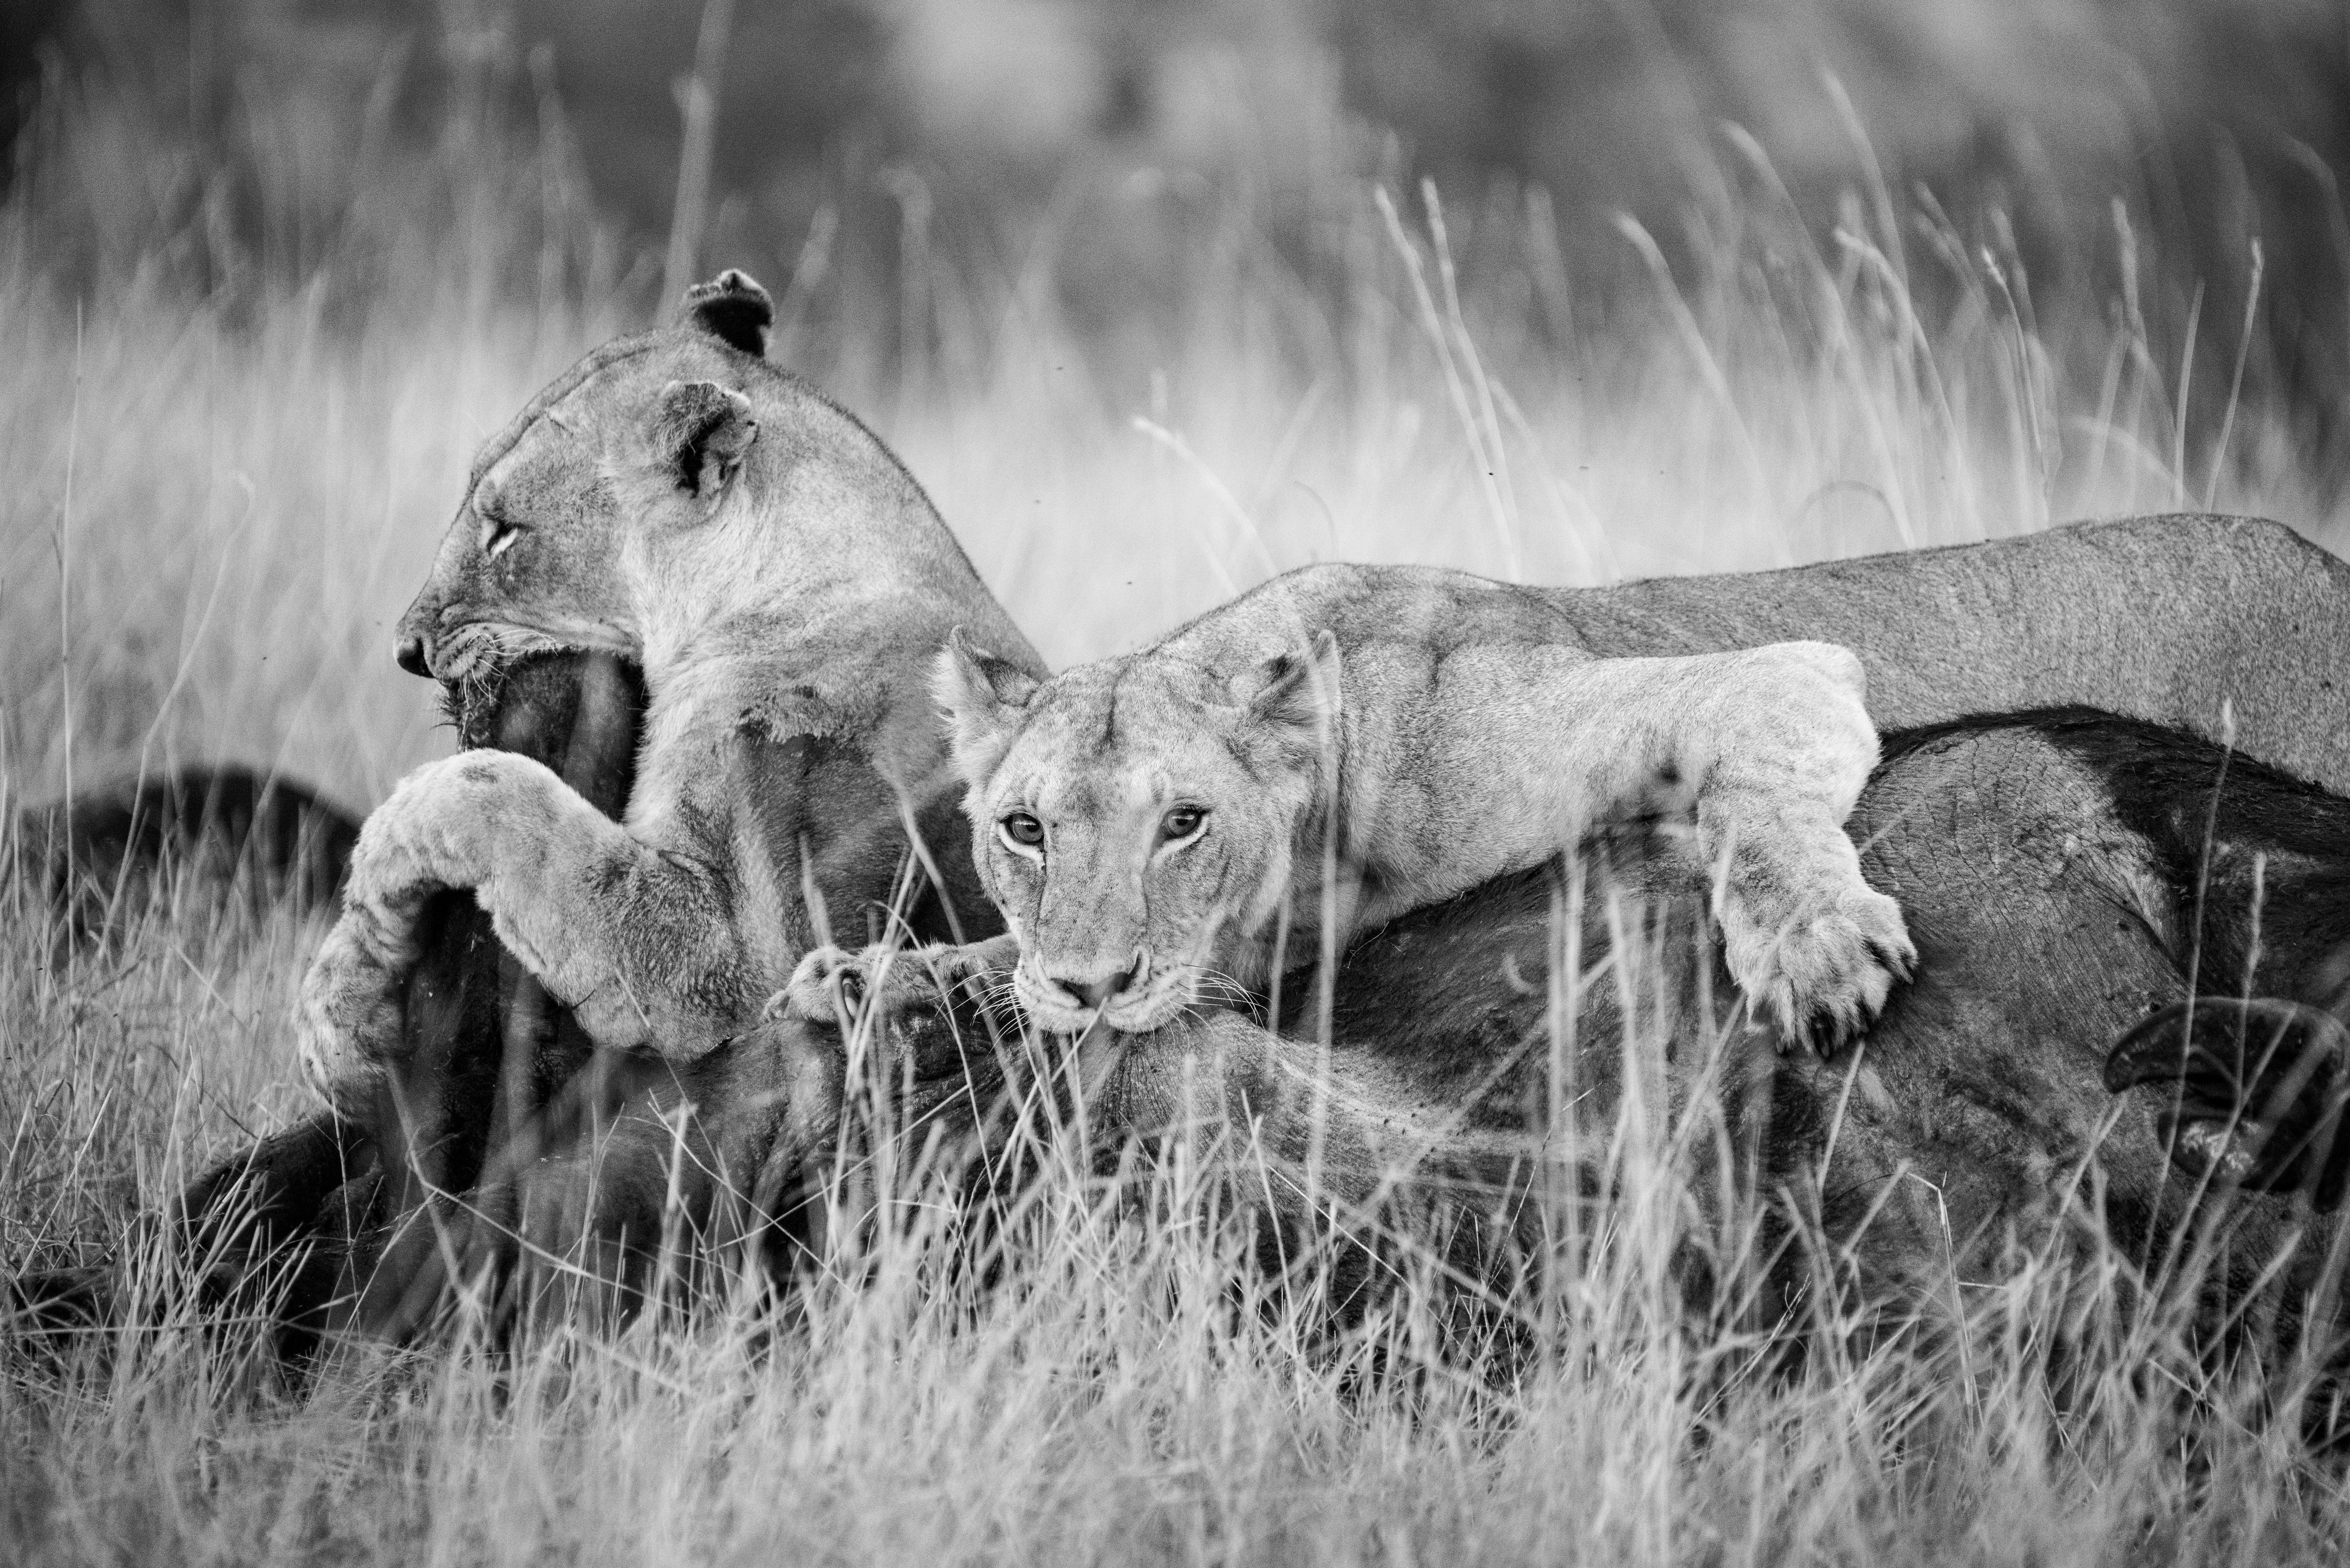 Dramatic black and white shot of the lionesses on the buffalo kill